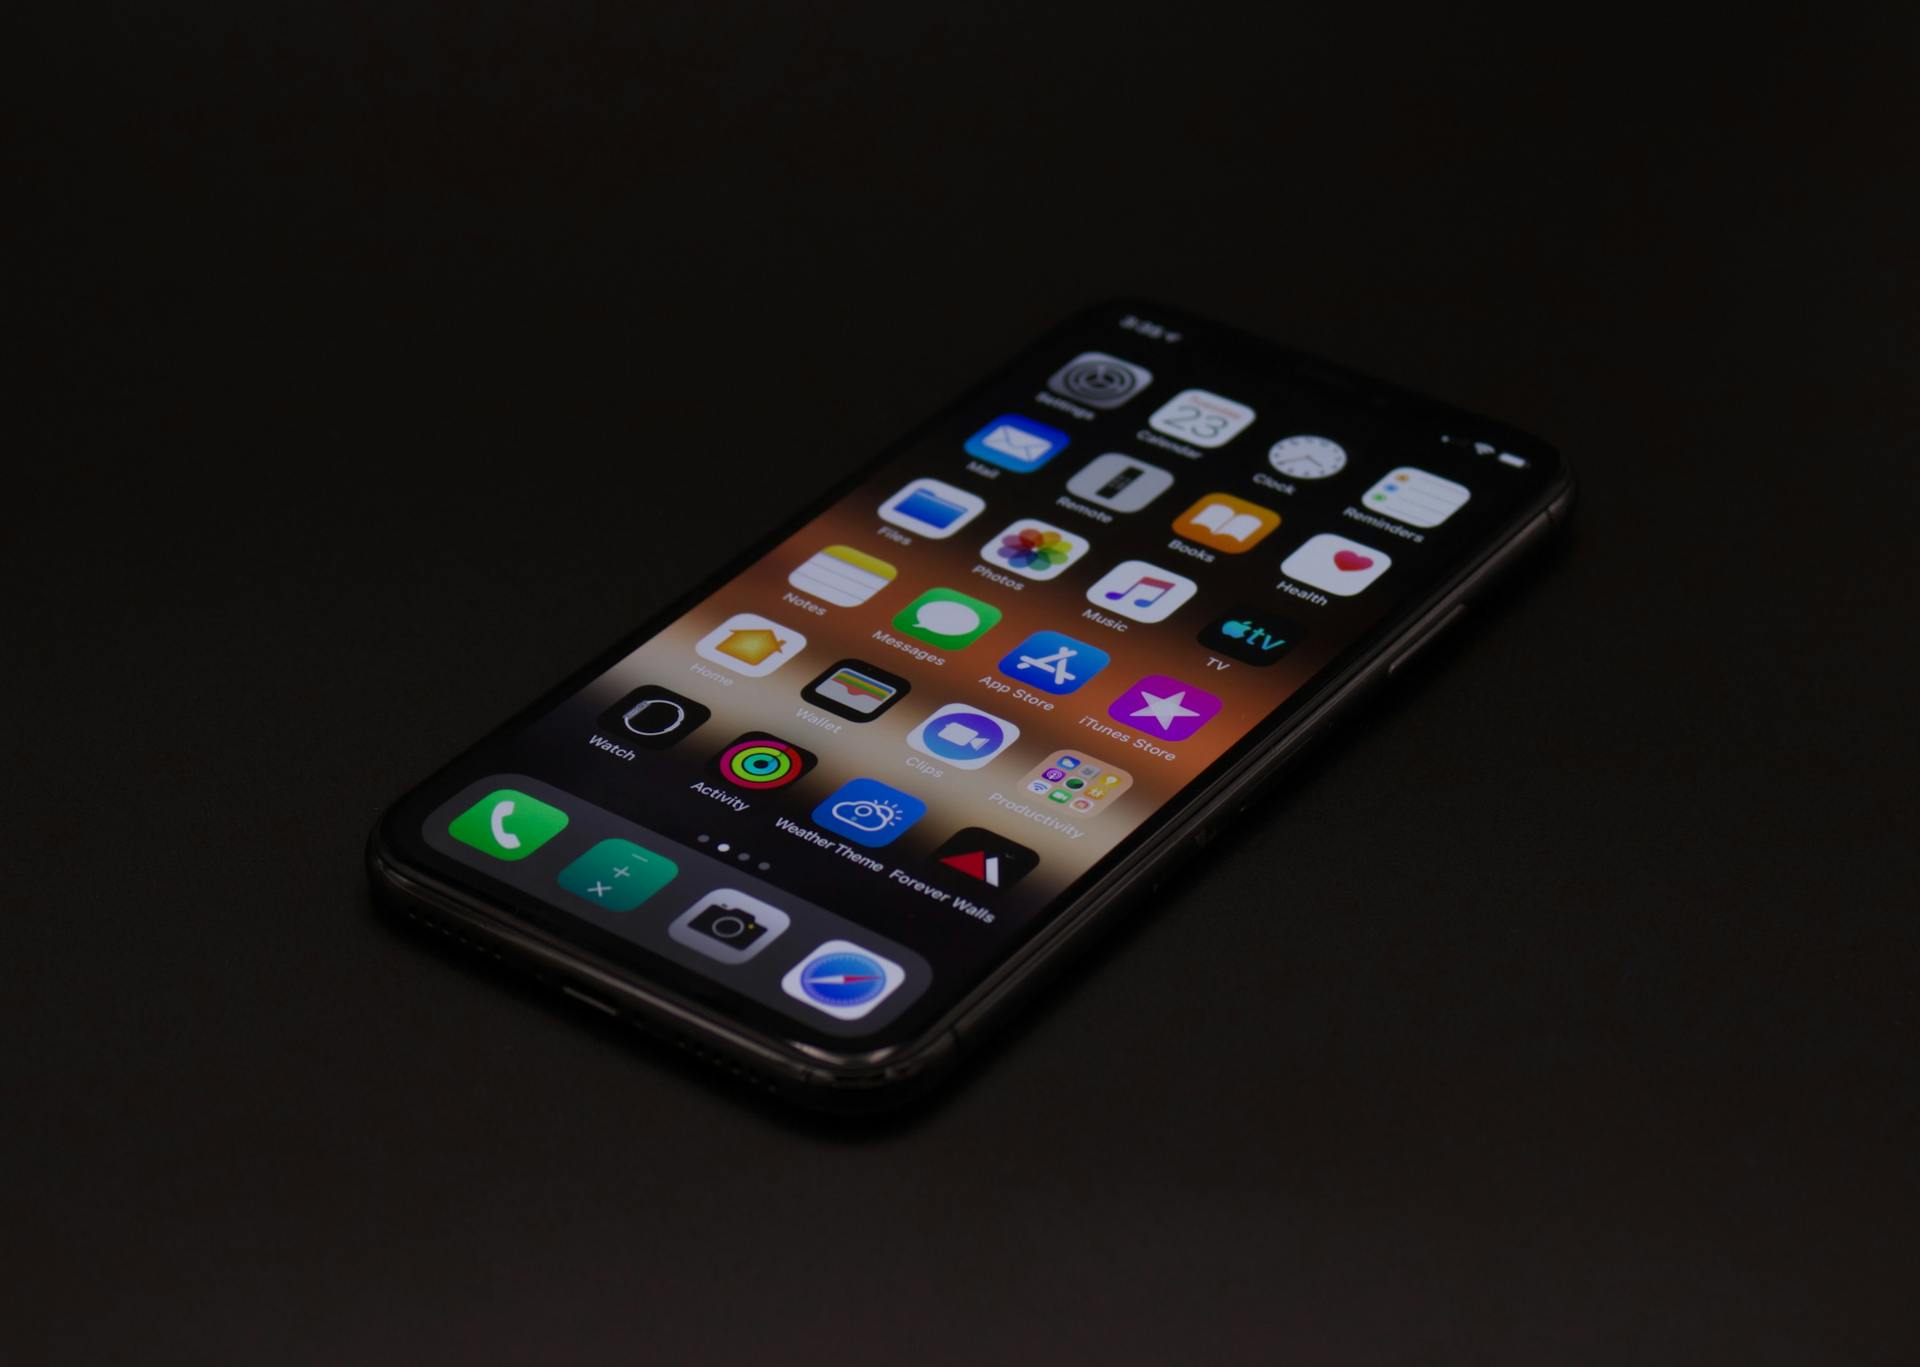 iPhone laying screen up on a black surface